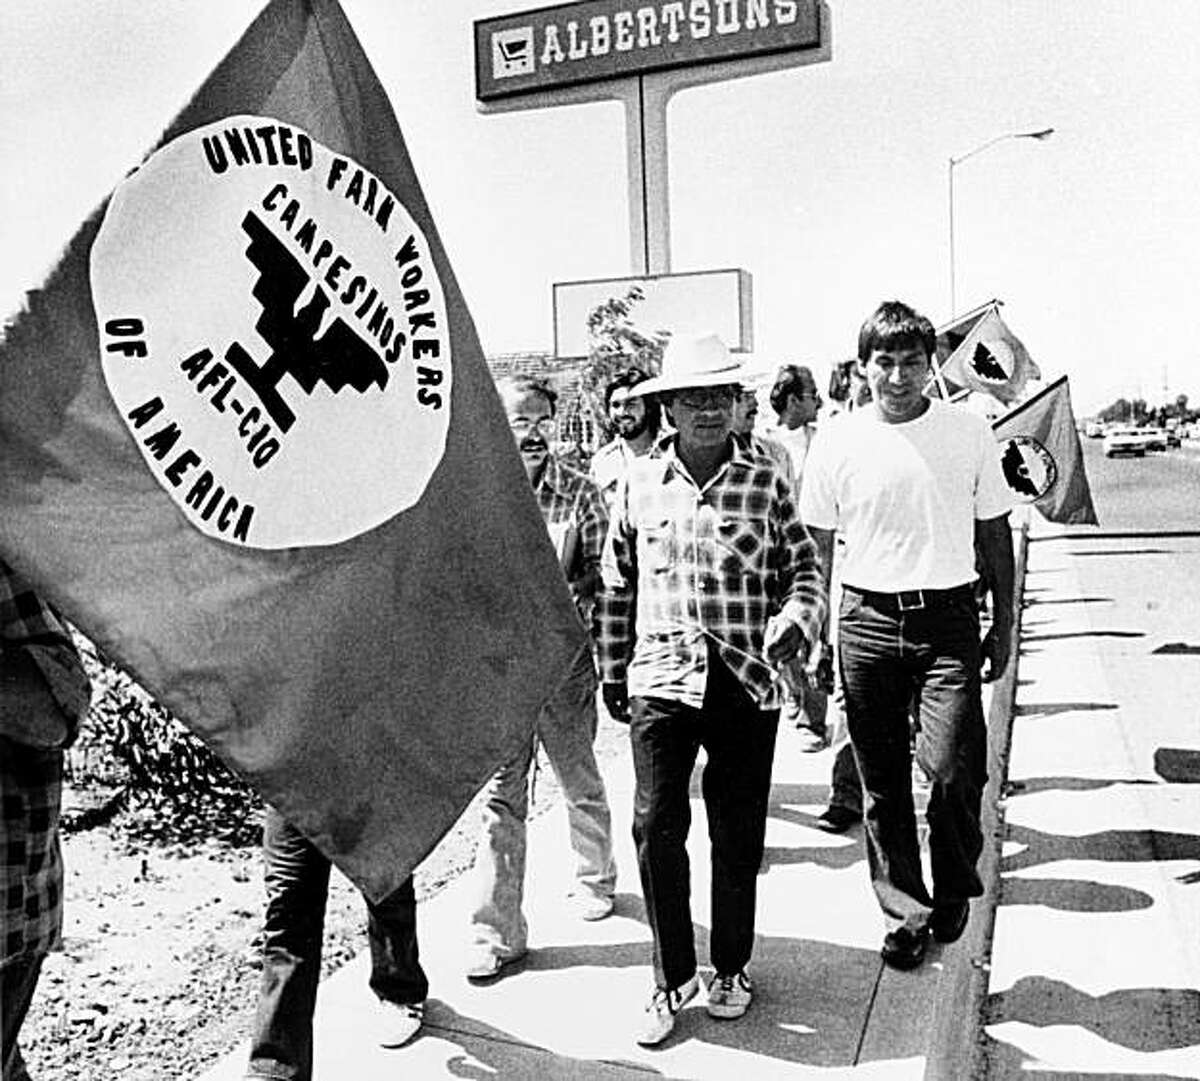 Cesar Chavez, in plaid shirt, marches with members of the United Farm Workers outside a Delano, Calif., supermarket in protest of the sale of products not harvested by their union, Aug. 25, 1975.